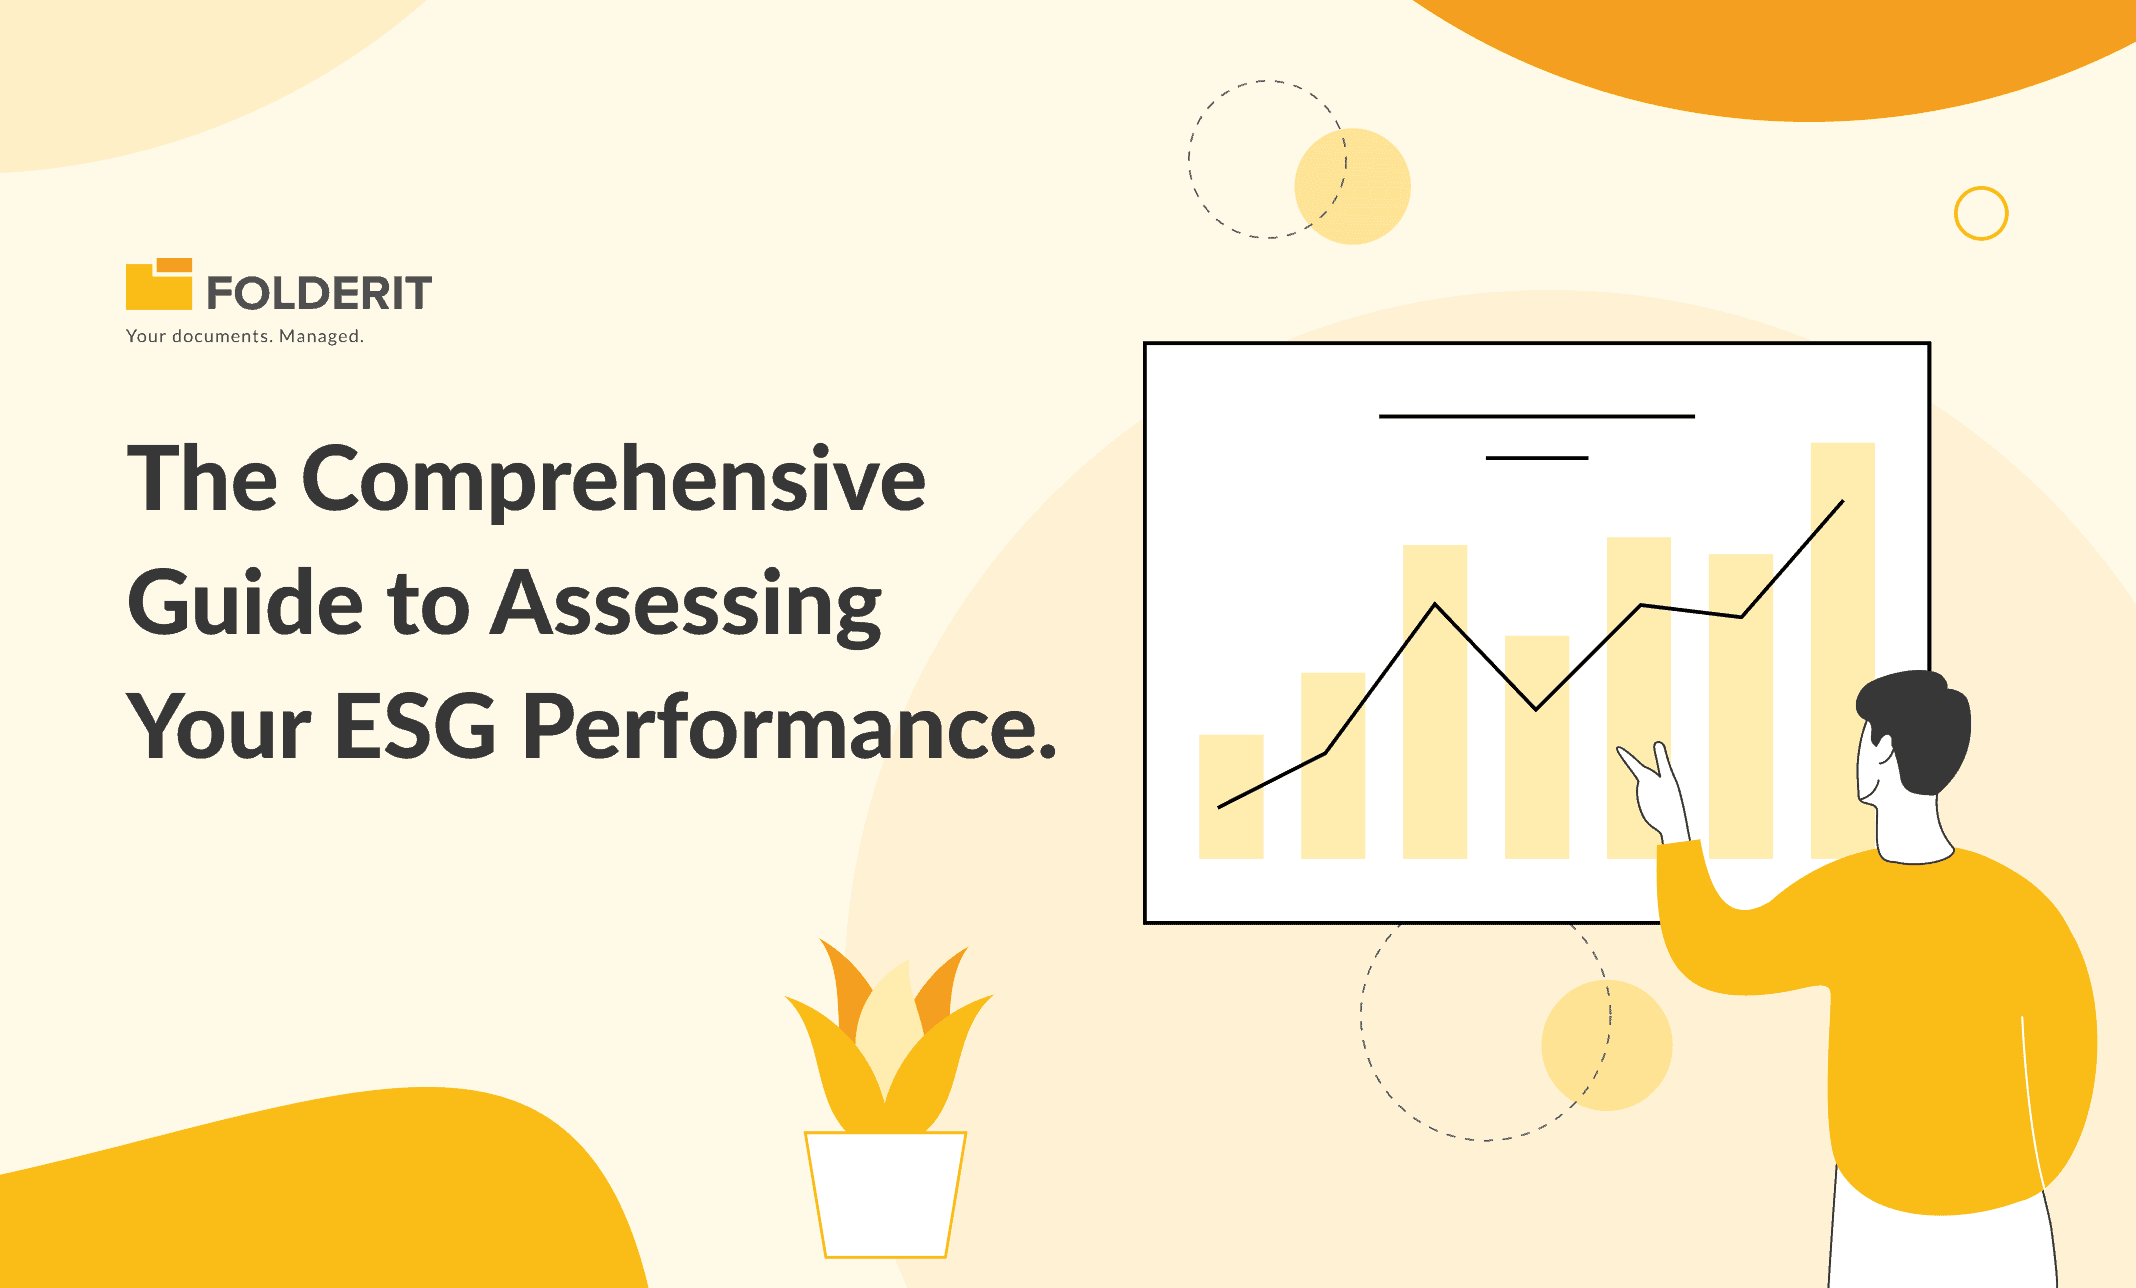 The Comprehensive Guide to Assessing Your ESG Performance.